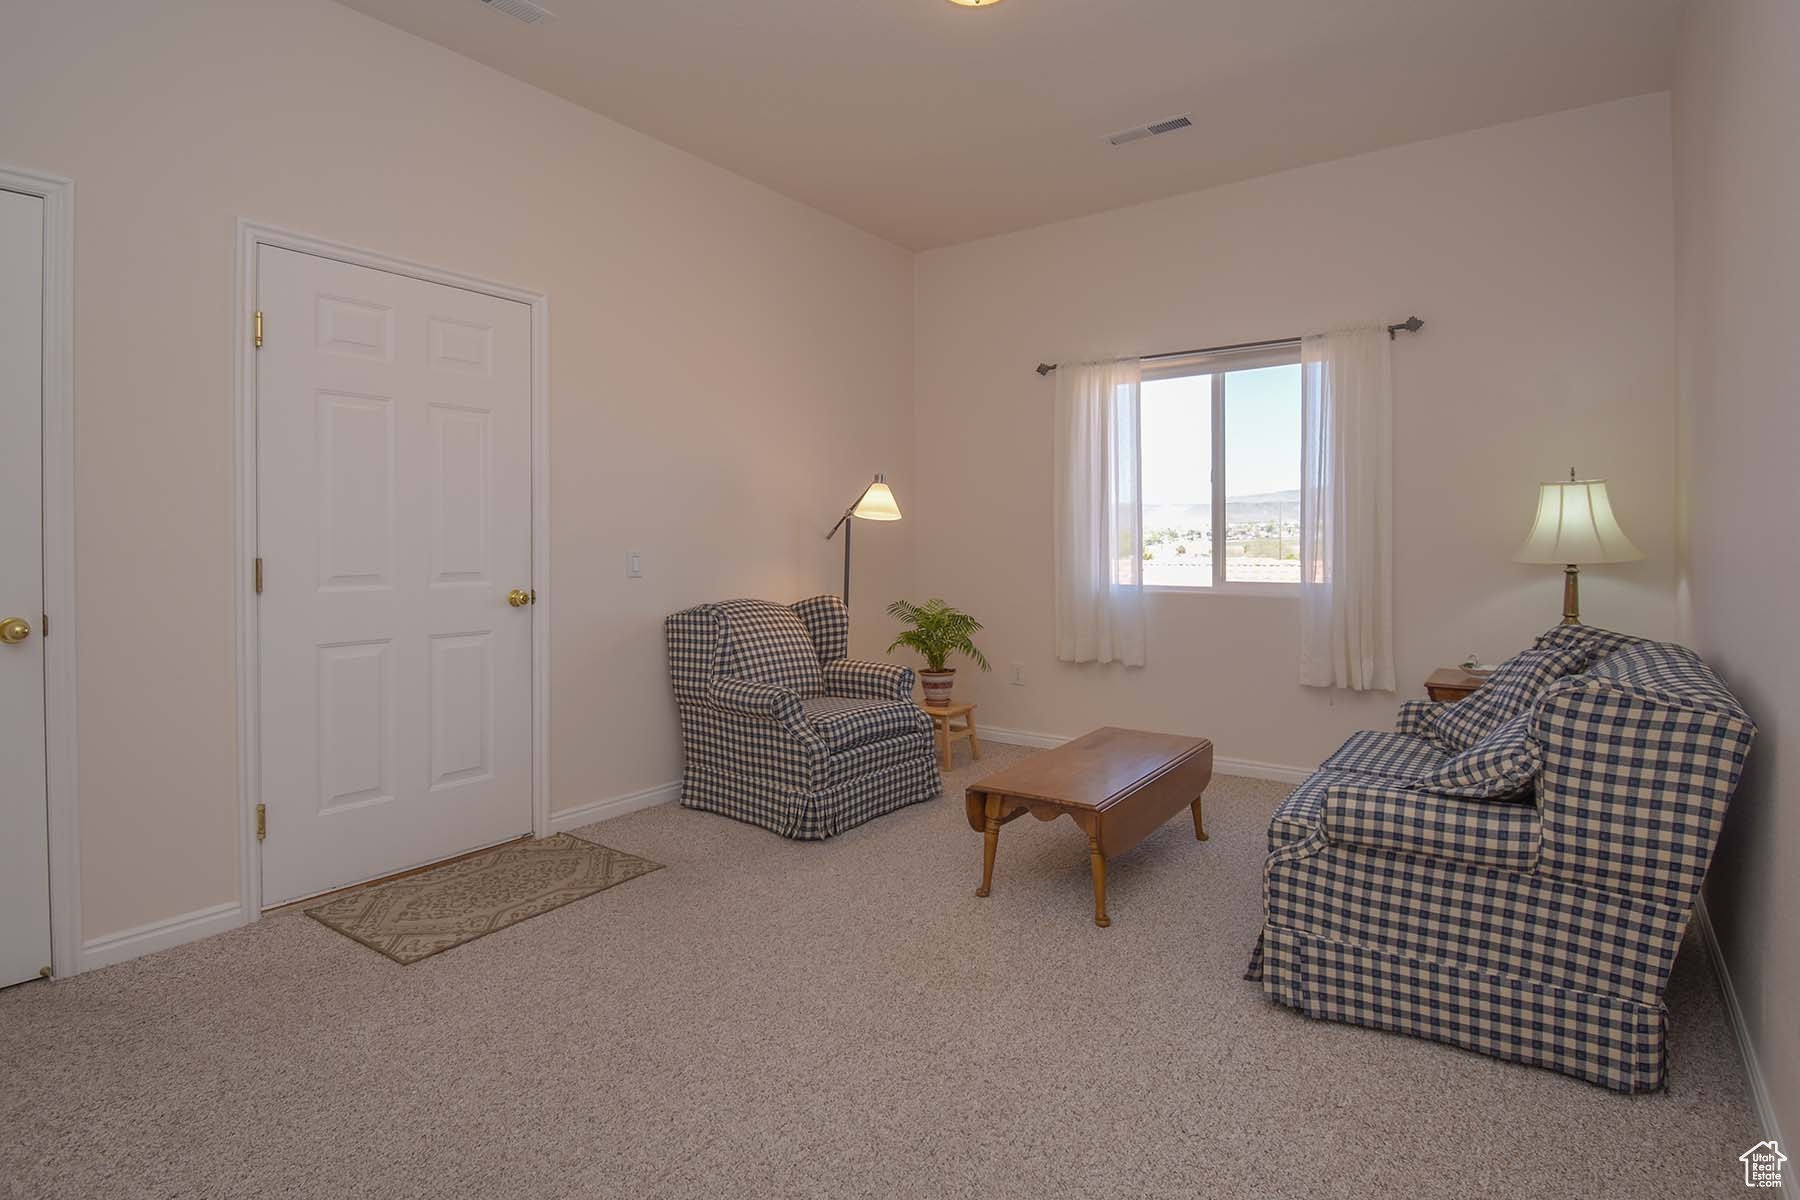 Sitting room with light colored carpet. Door leads to garage